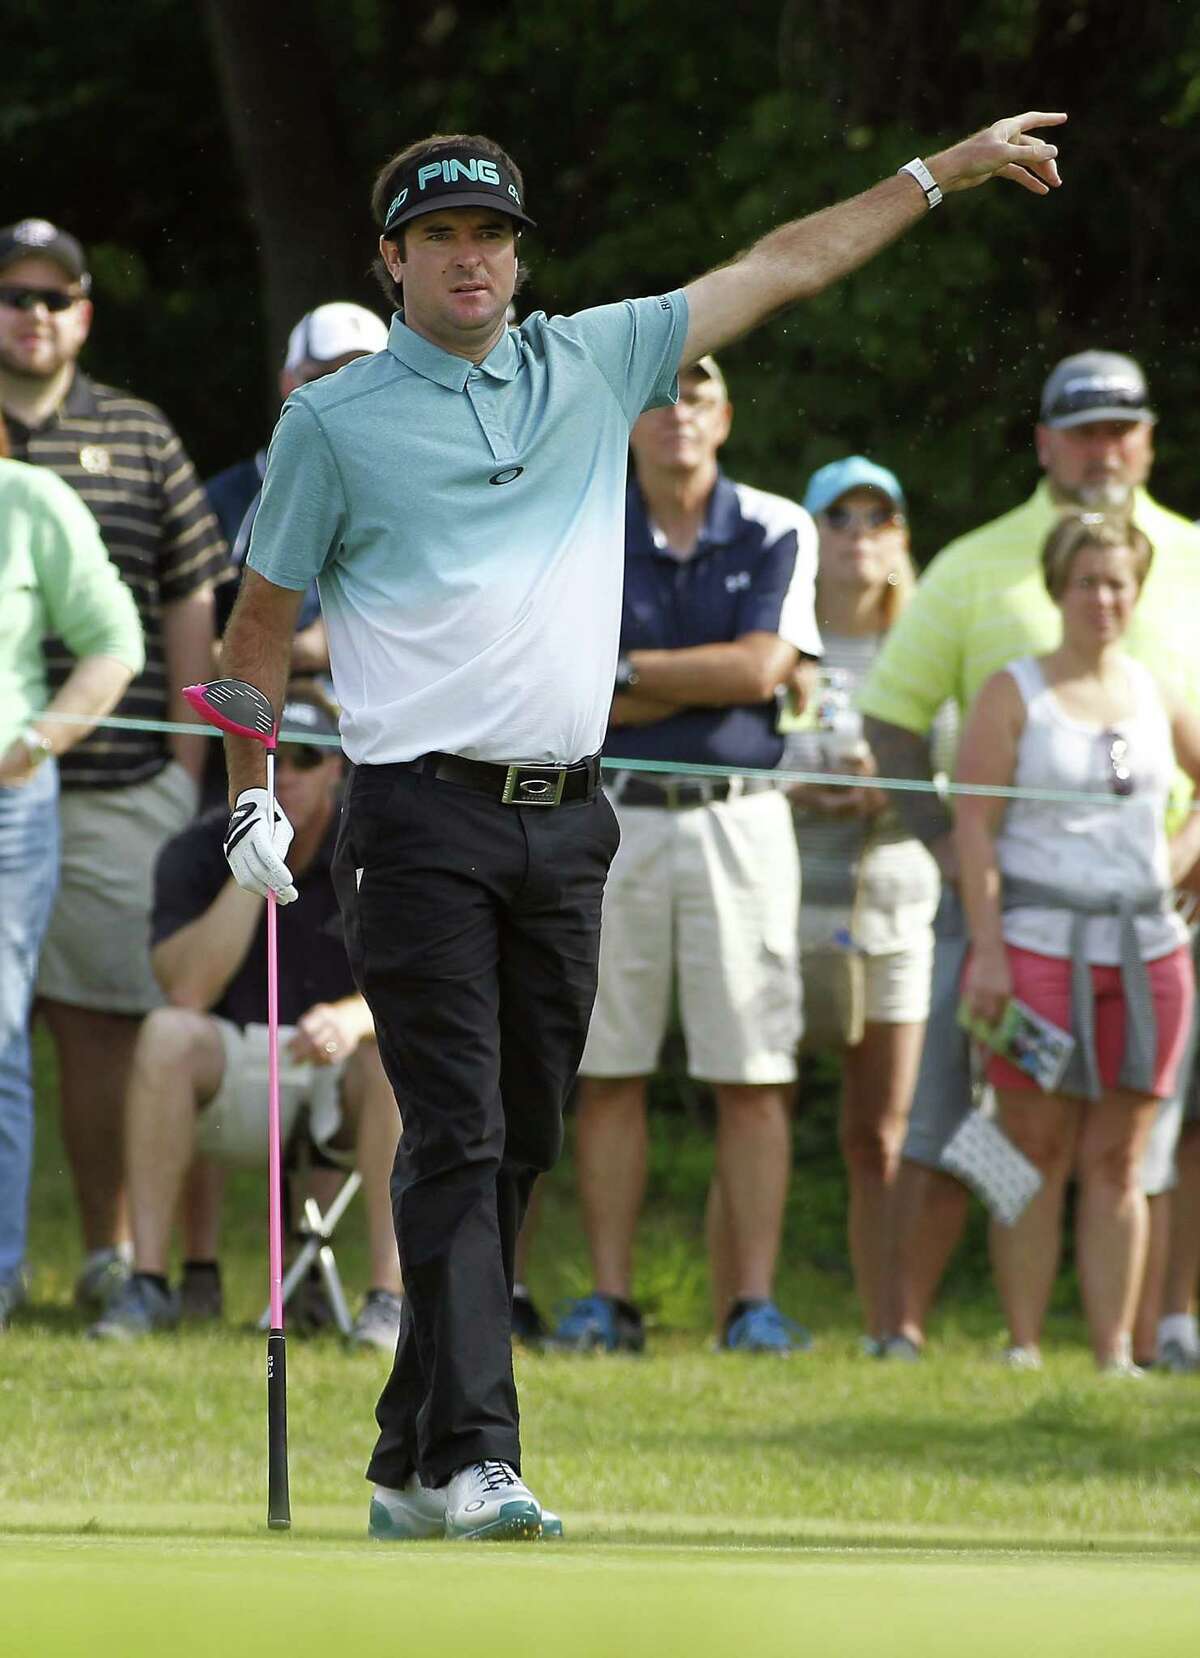 Leader Bubba Watson was drug tested following his 3-under 67 on Friday at the Travelers Championship.